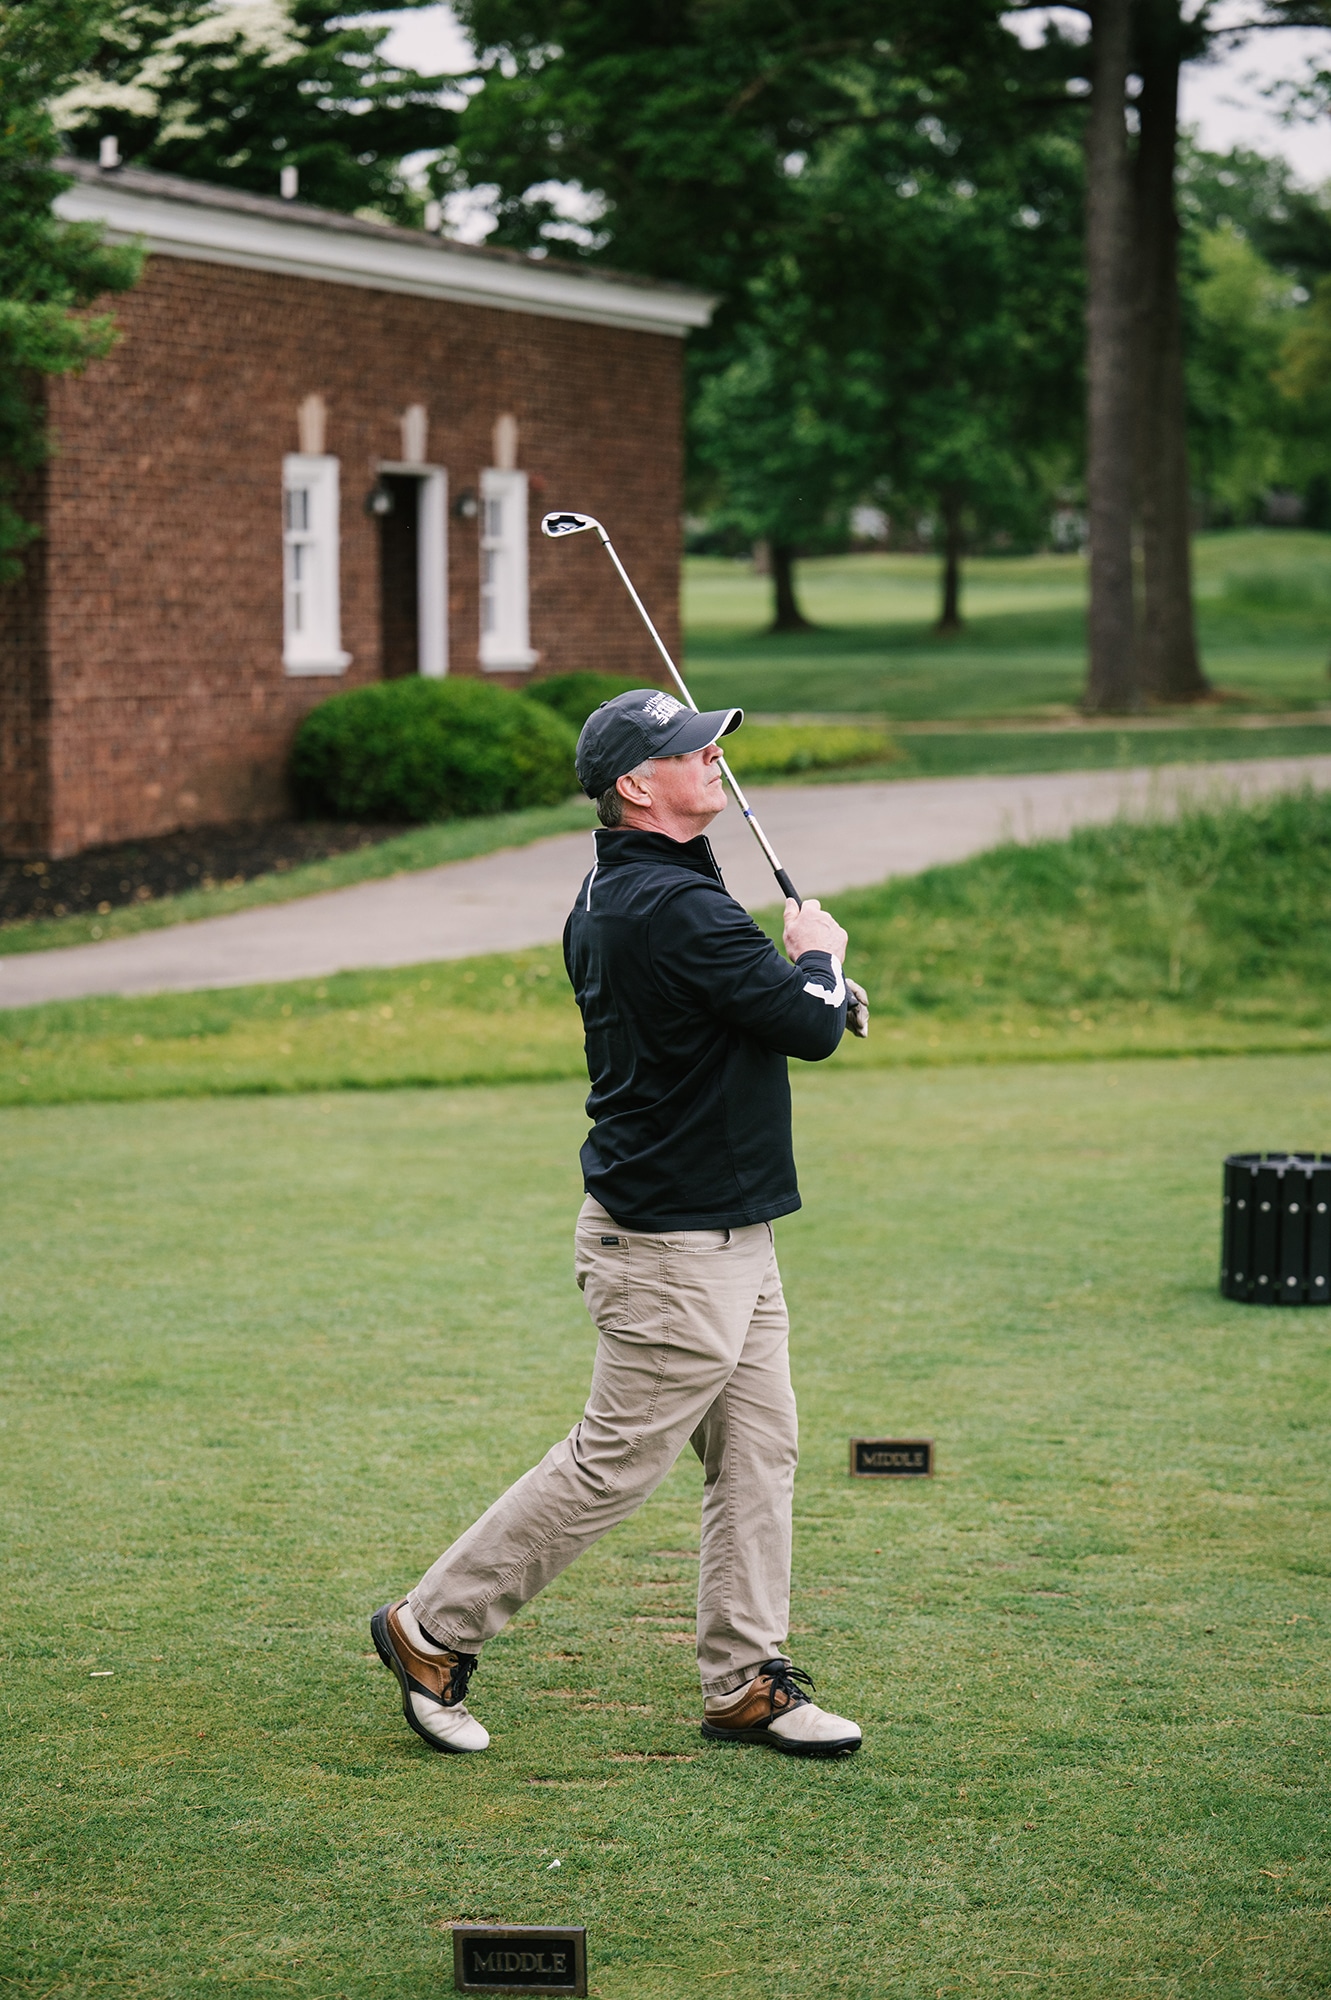 Community Options, Inc. hosted its 28th annual iMatter Spring Golf Classic, chaired by Philip Lian, at TPC Jasna Polana on Monday, May 24th, 2021.